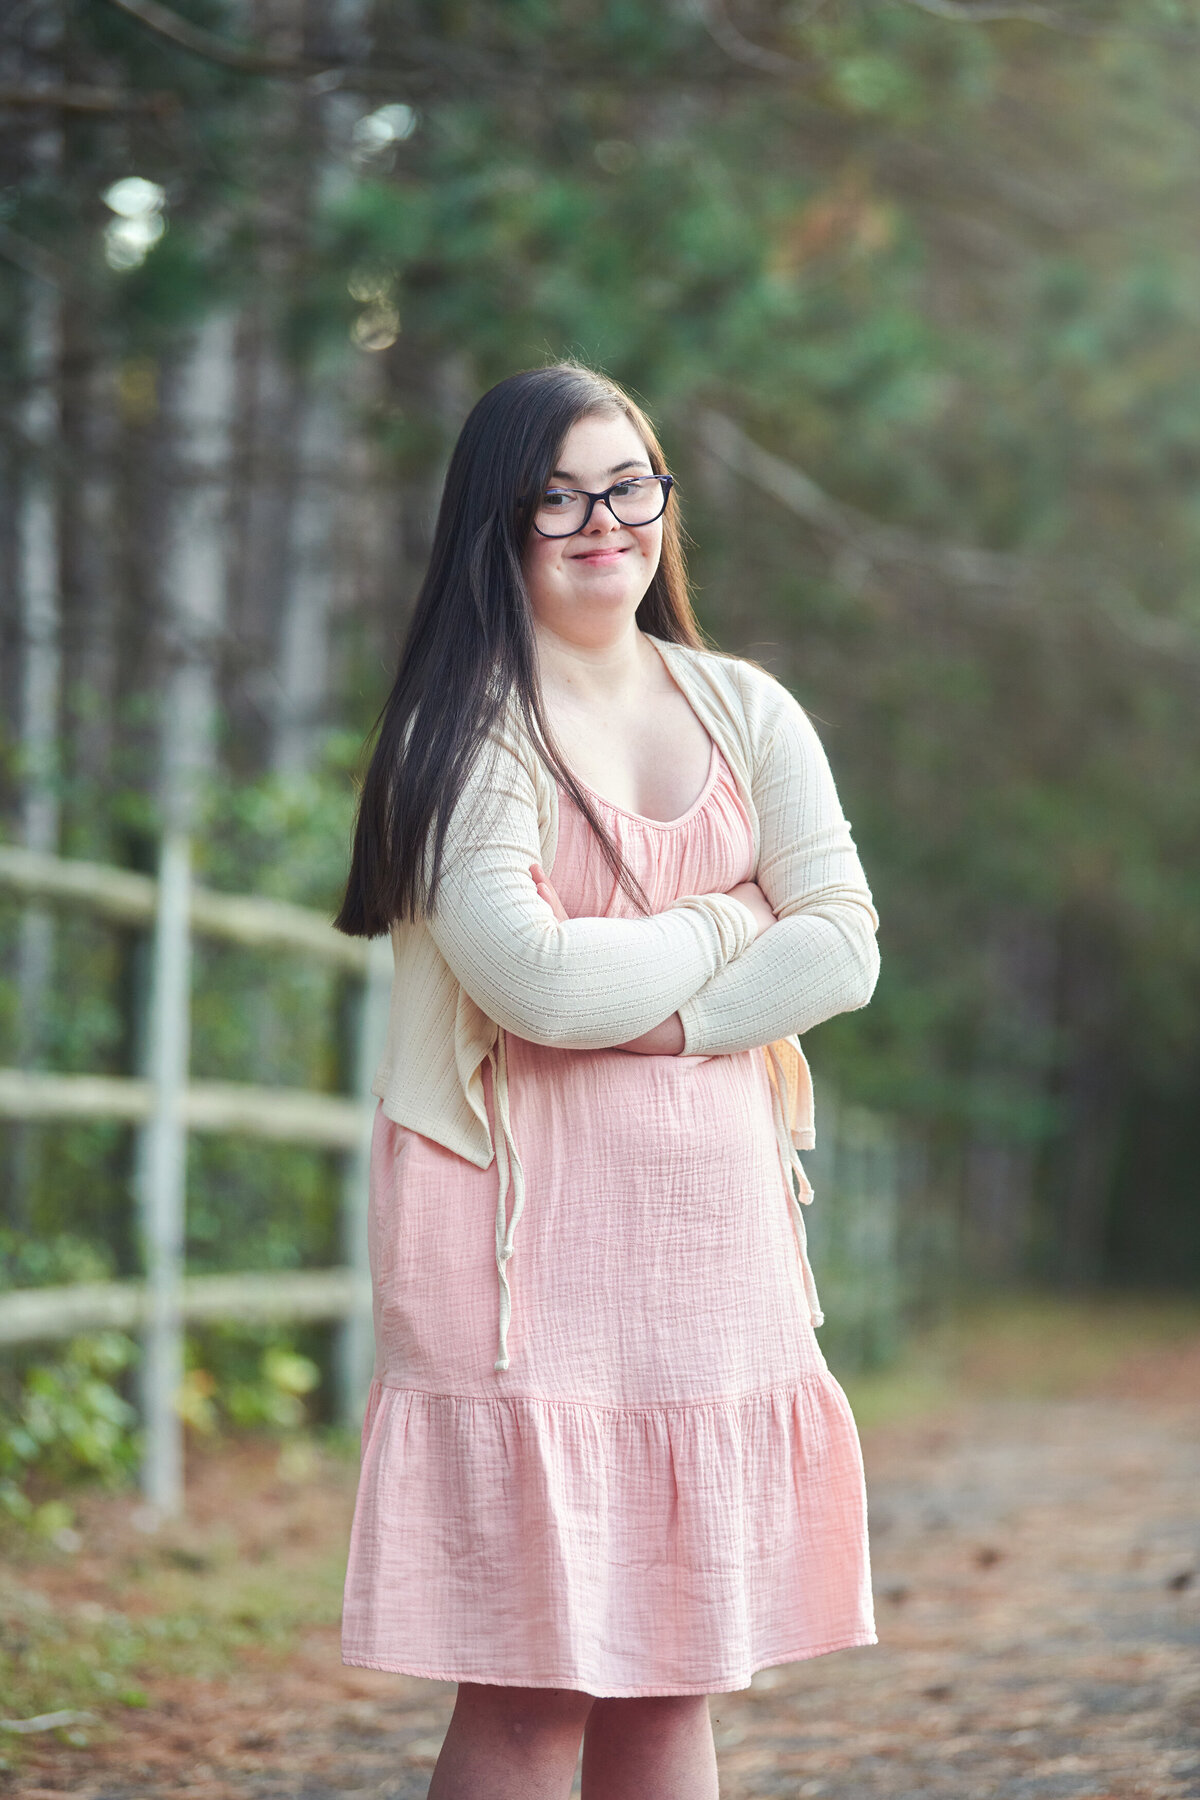 beautiful girl downs syndrome forest trees senior portraits